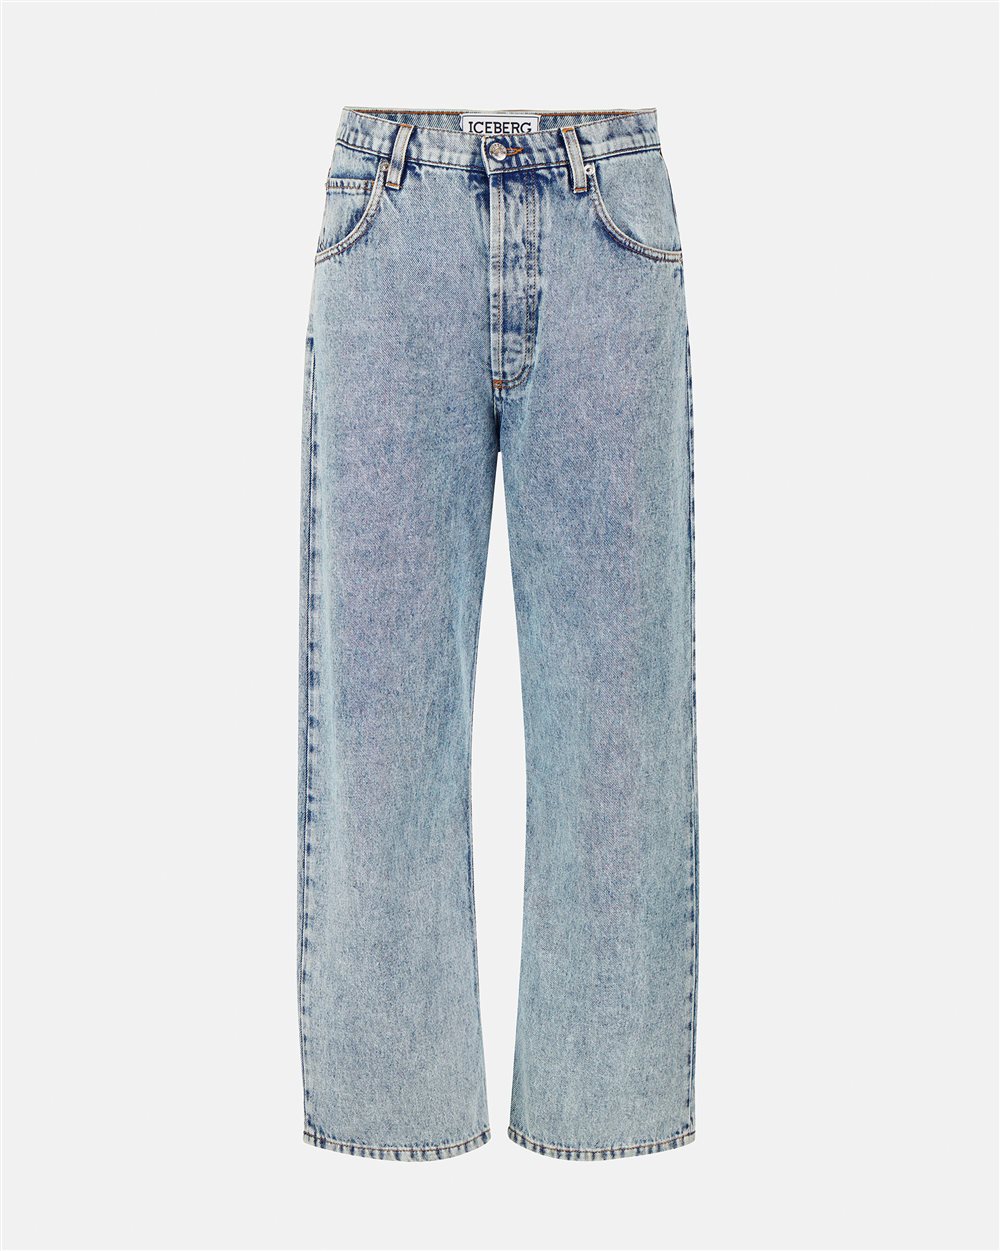 Wide leg jeans with logo - Iceberg - Official Website